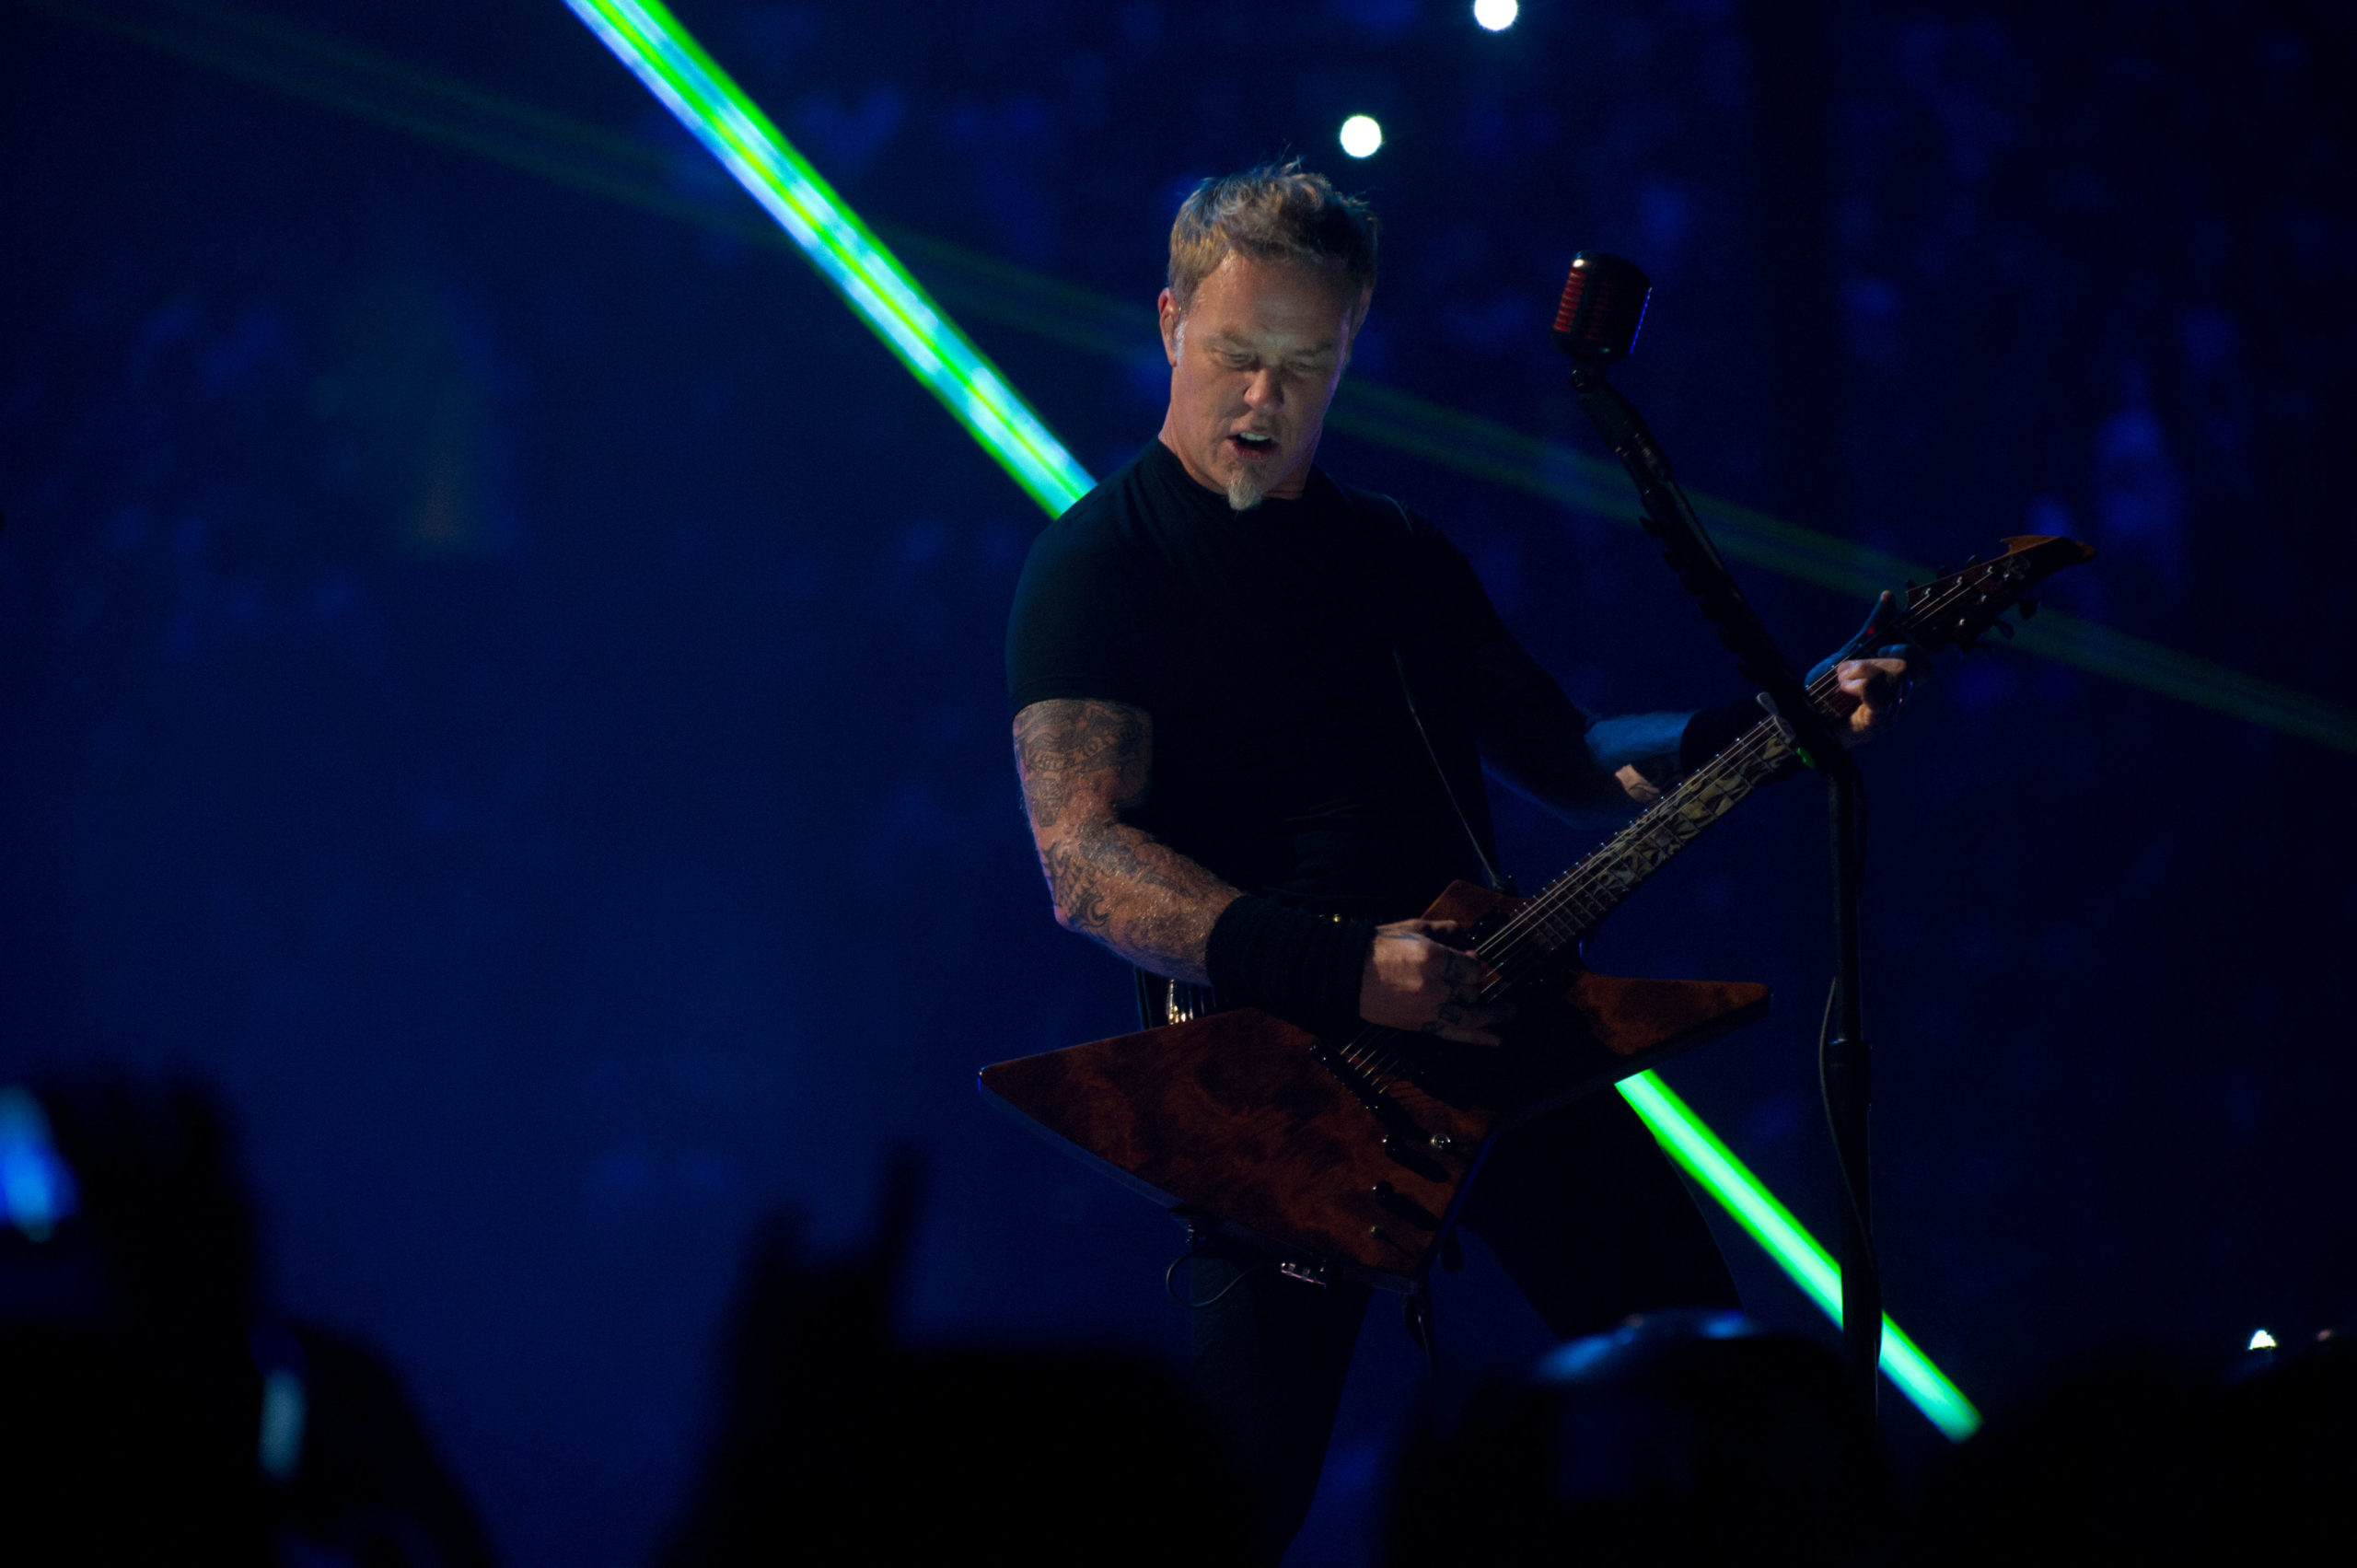 metallica-_photo_credit-_photograph_by_ross_halfin____metallica_through_the_never__courtesy_of_picturehouse-3-scaled-6112531-4782468-jpg